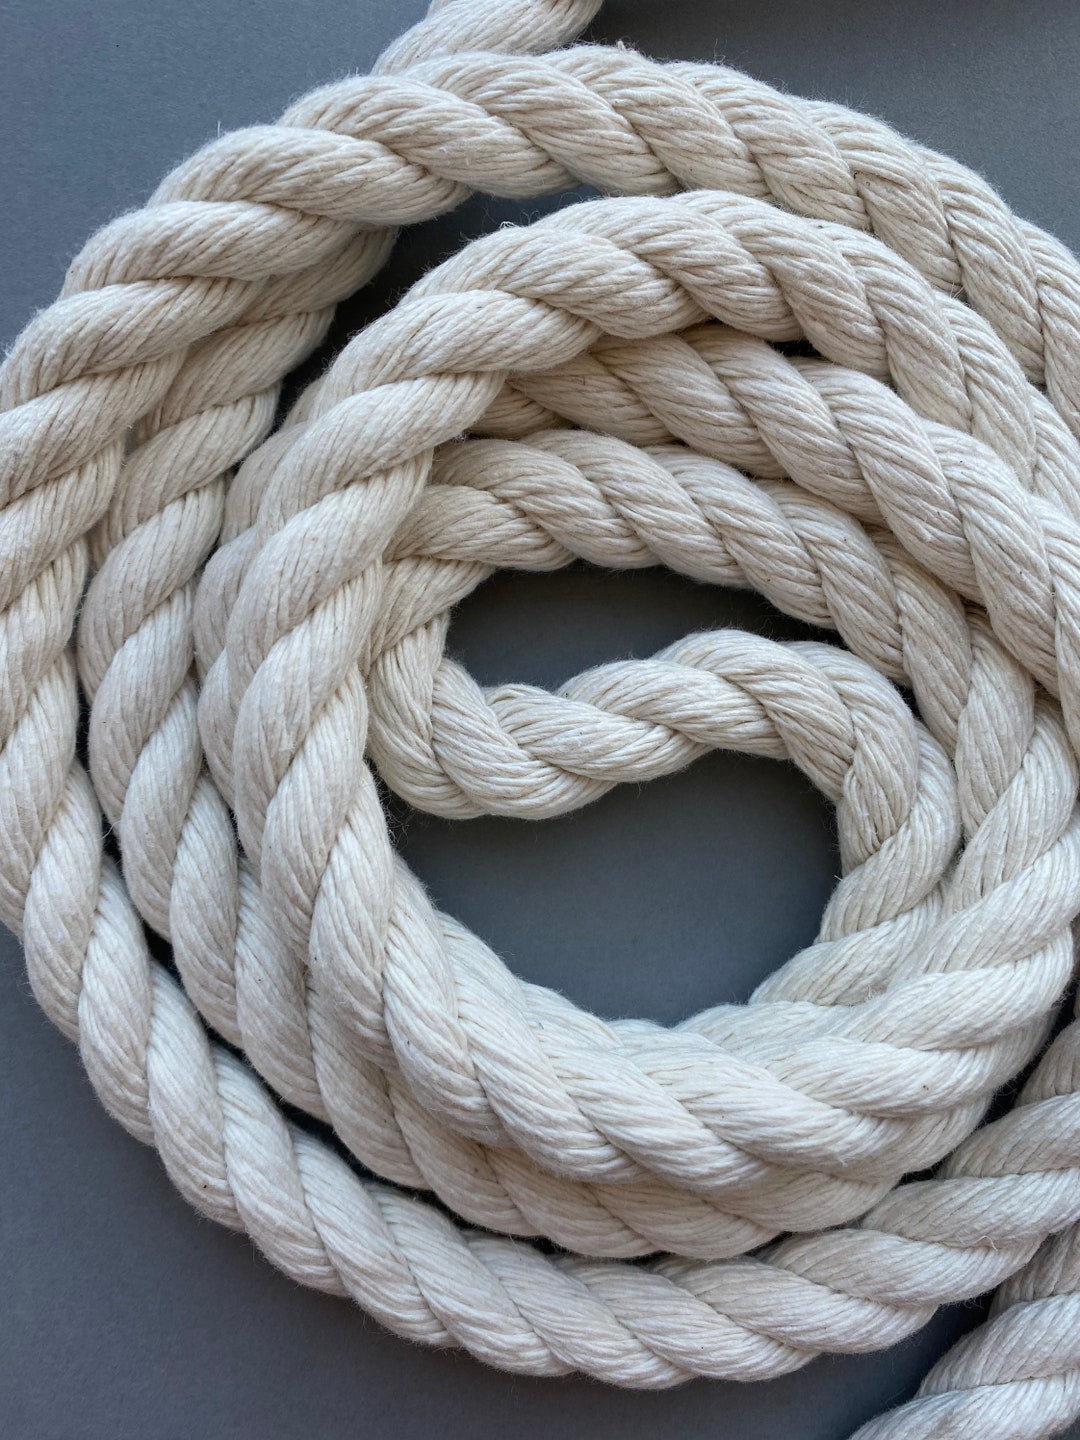 White Cotton Rope 3/8 inch x 100 Feet Natural Thick Rope Twisted Rope for  Wall Hanging, Decor Crafts Projects, Home Decoration